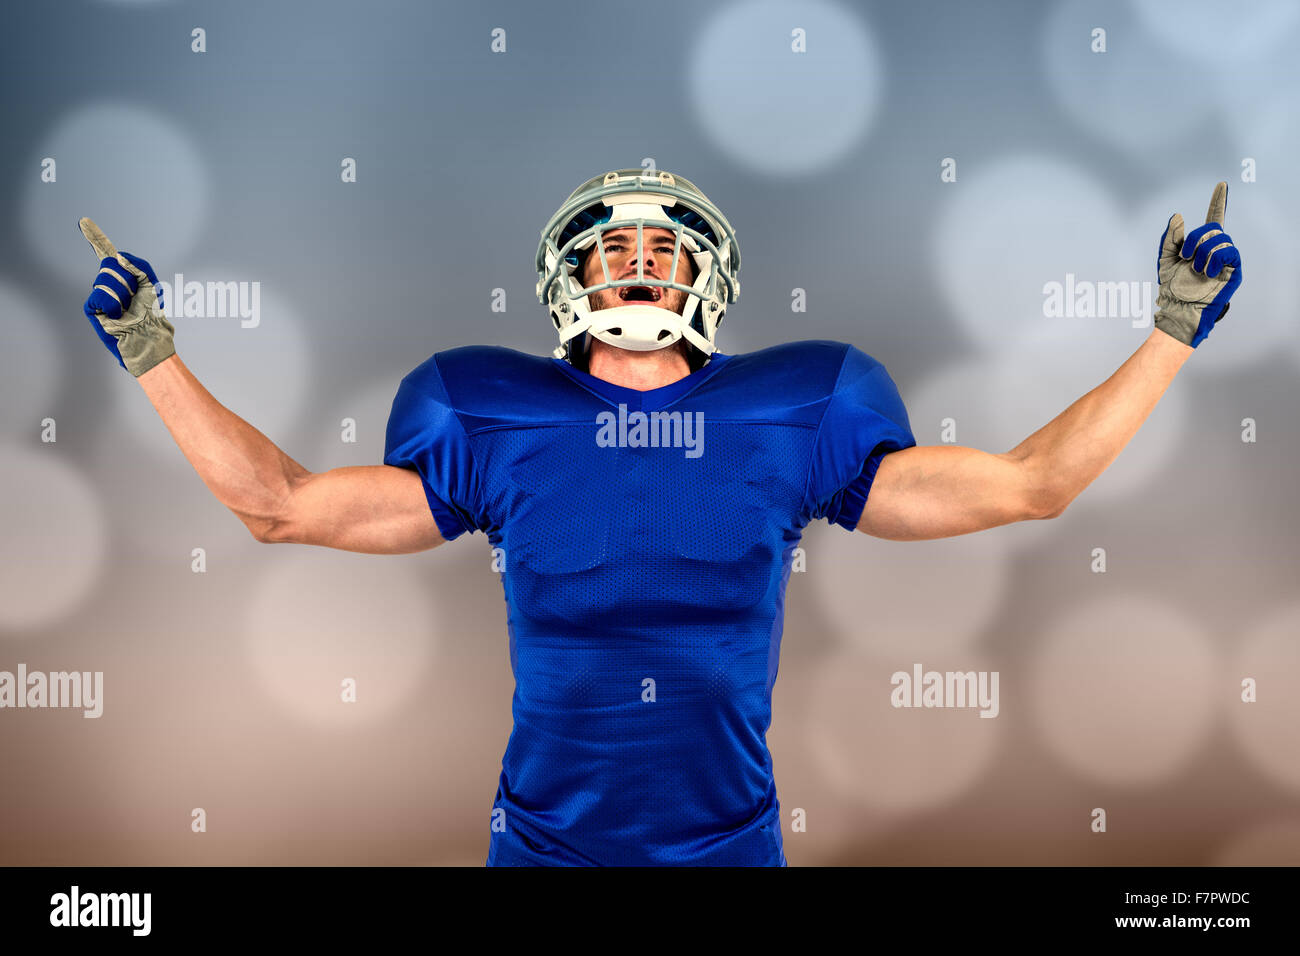 Composite image of american football player with arms outstretched Banque D'Images